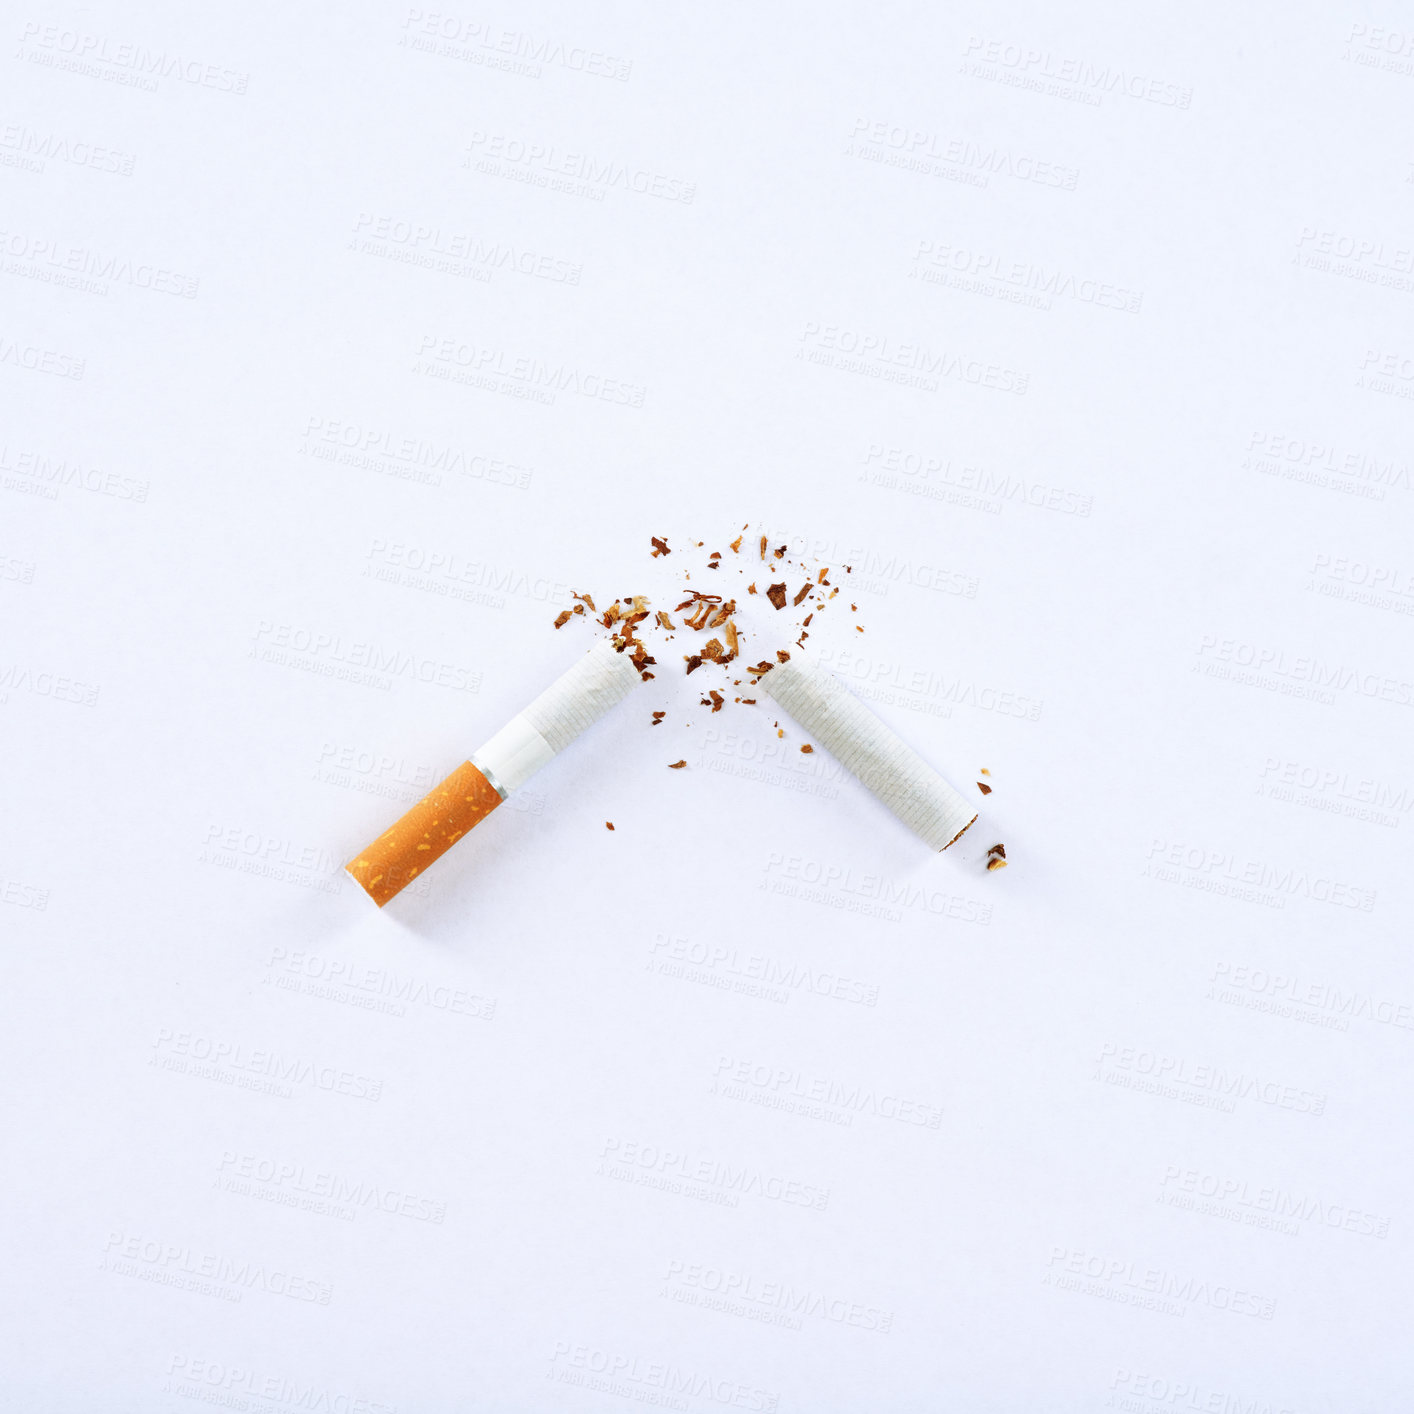 Buy stock photo A broken cigarette on a white background